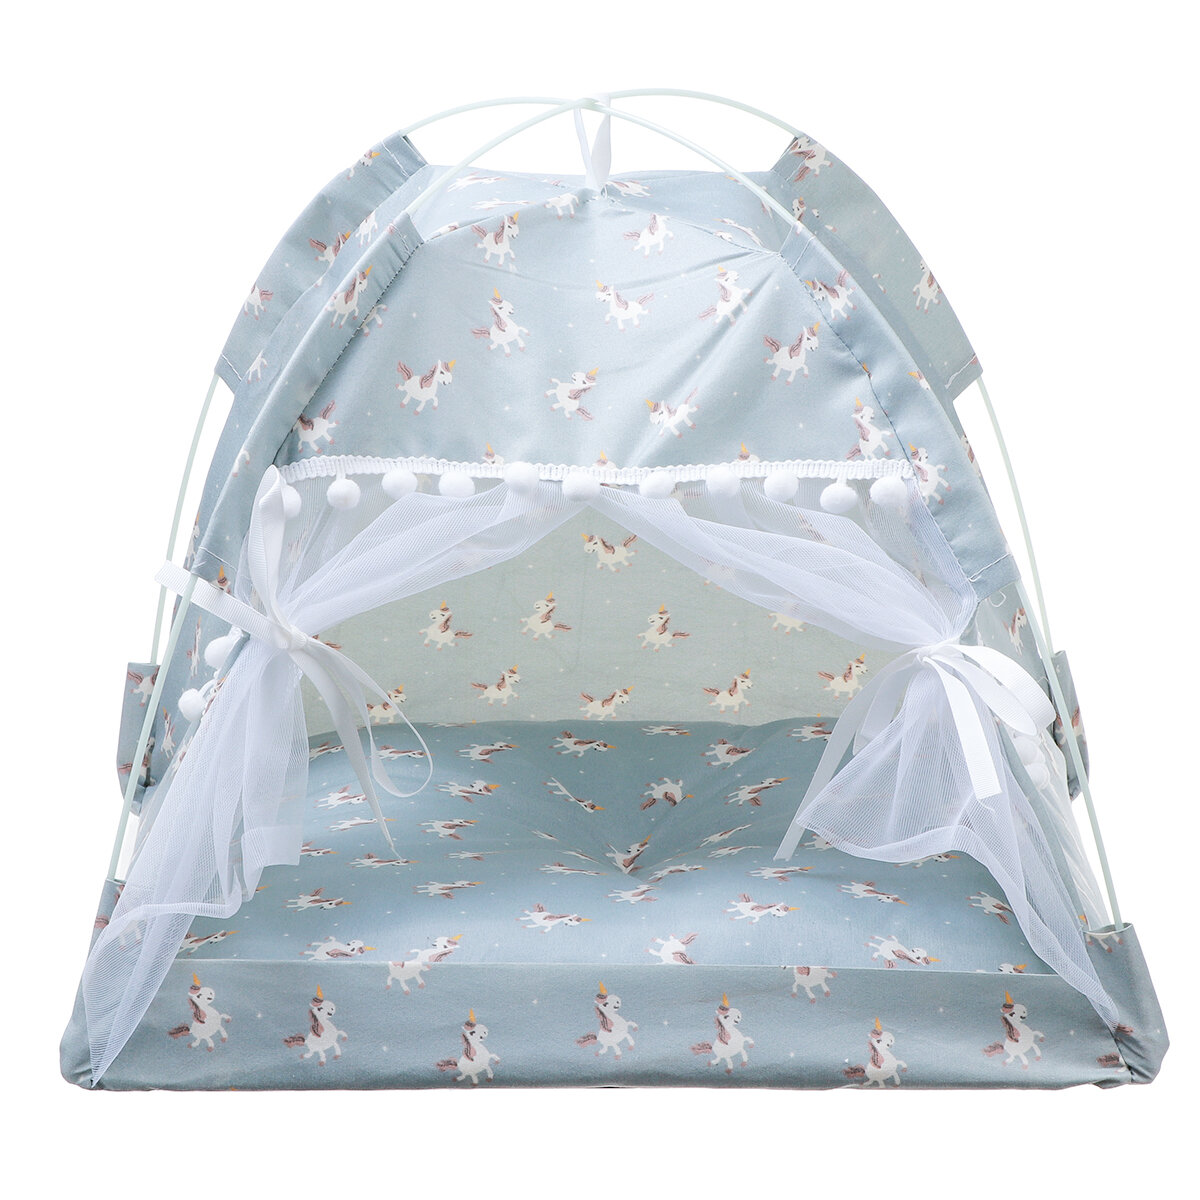 Pet Tent Cat Bed Puppy House Cushion Pad Bed Flamingo Pattern Indo-heyidear